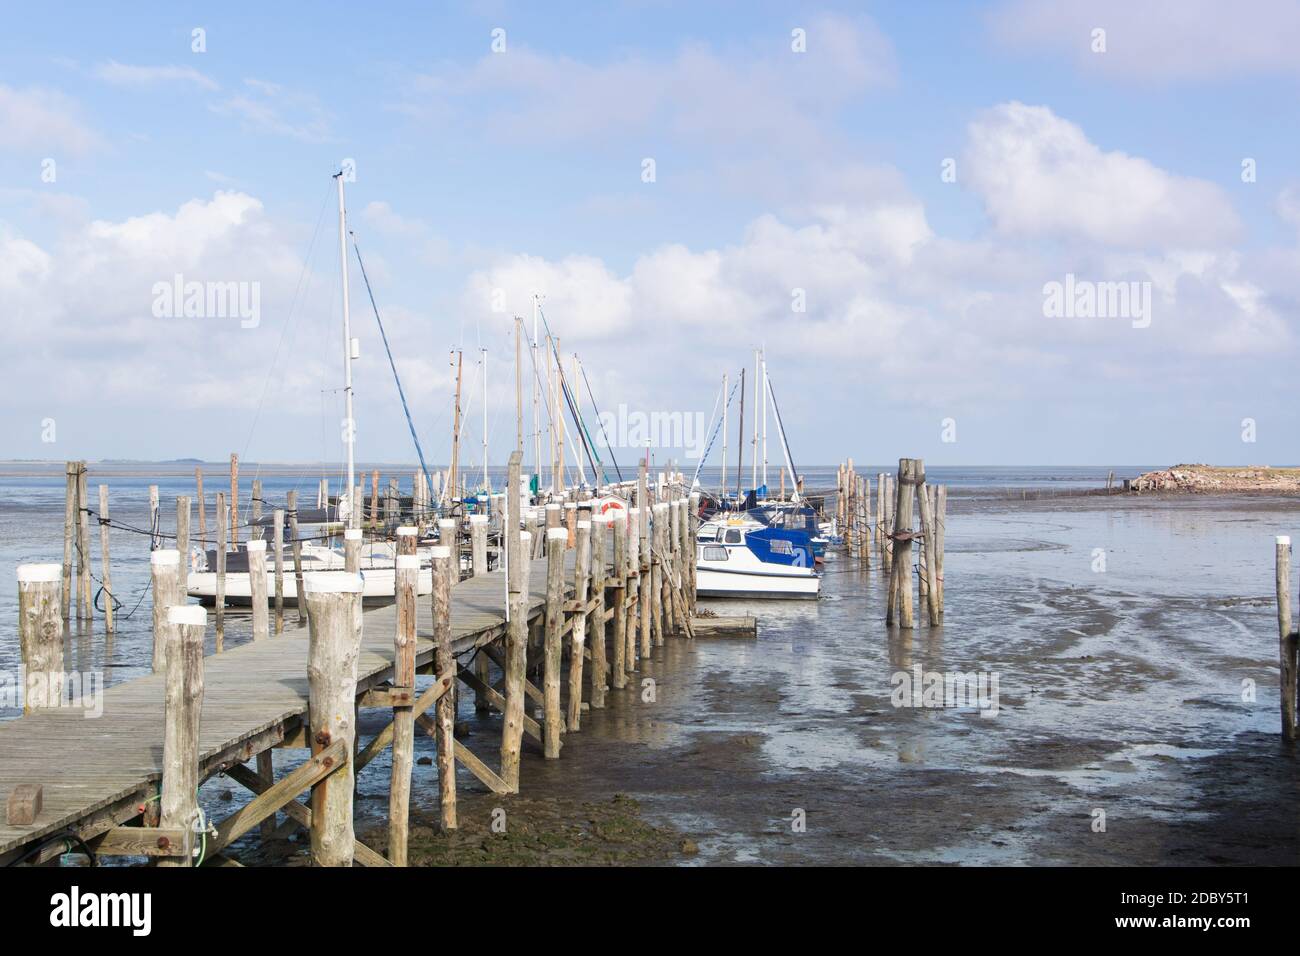 boats at the port of rantum, sylt in germany Stock Photo